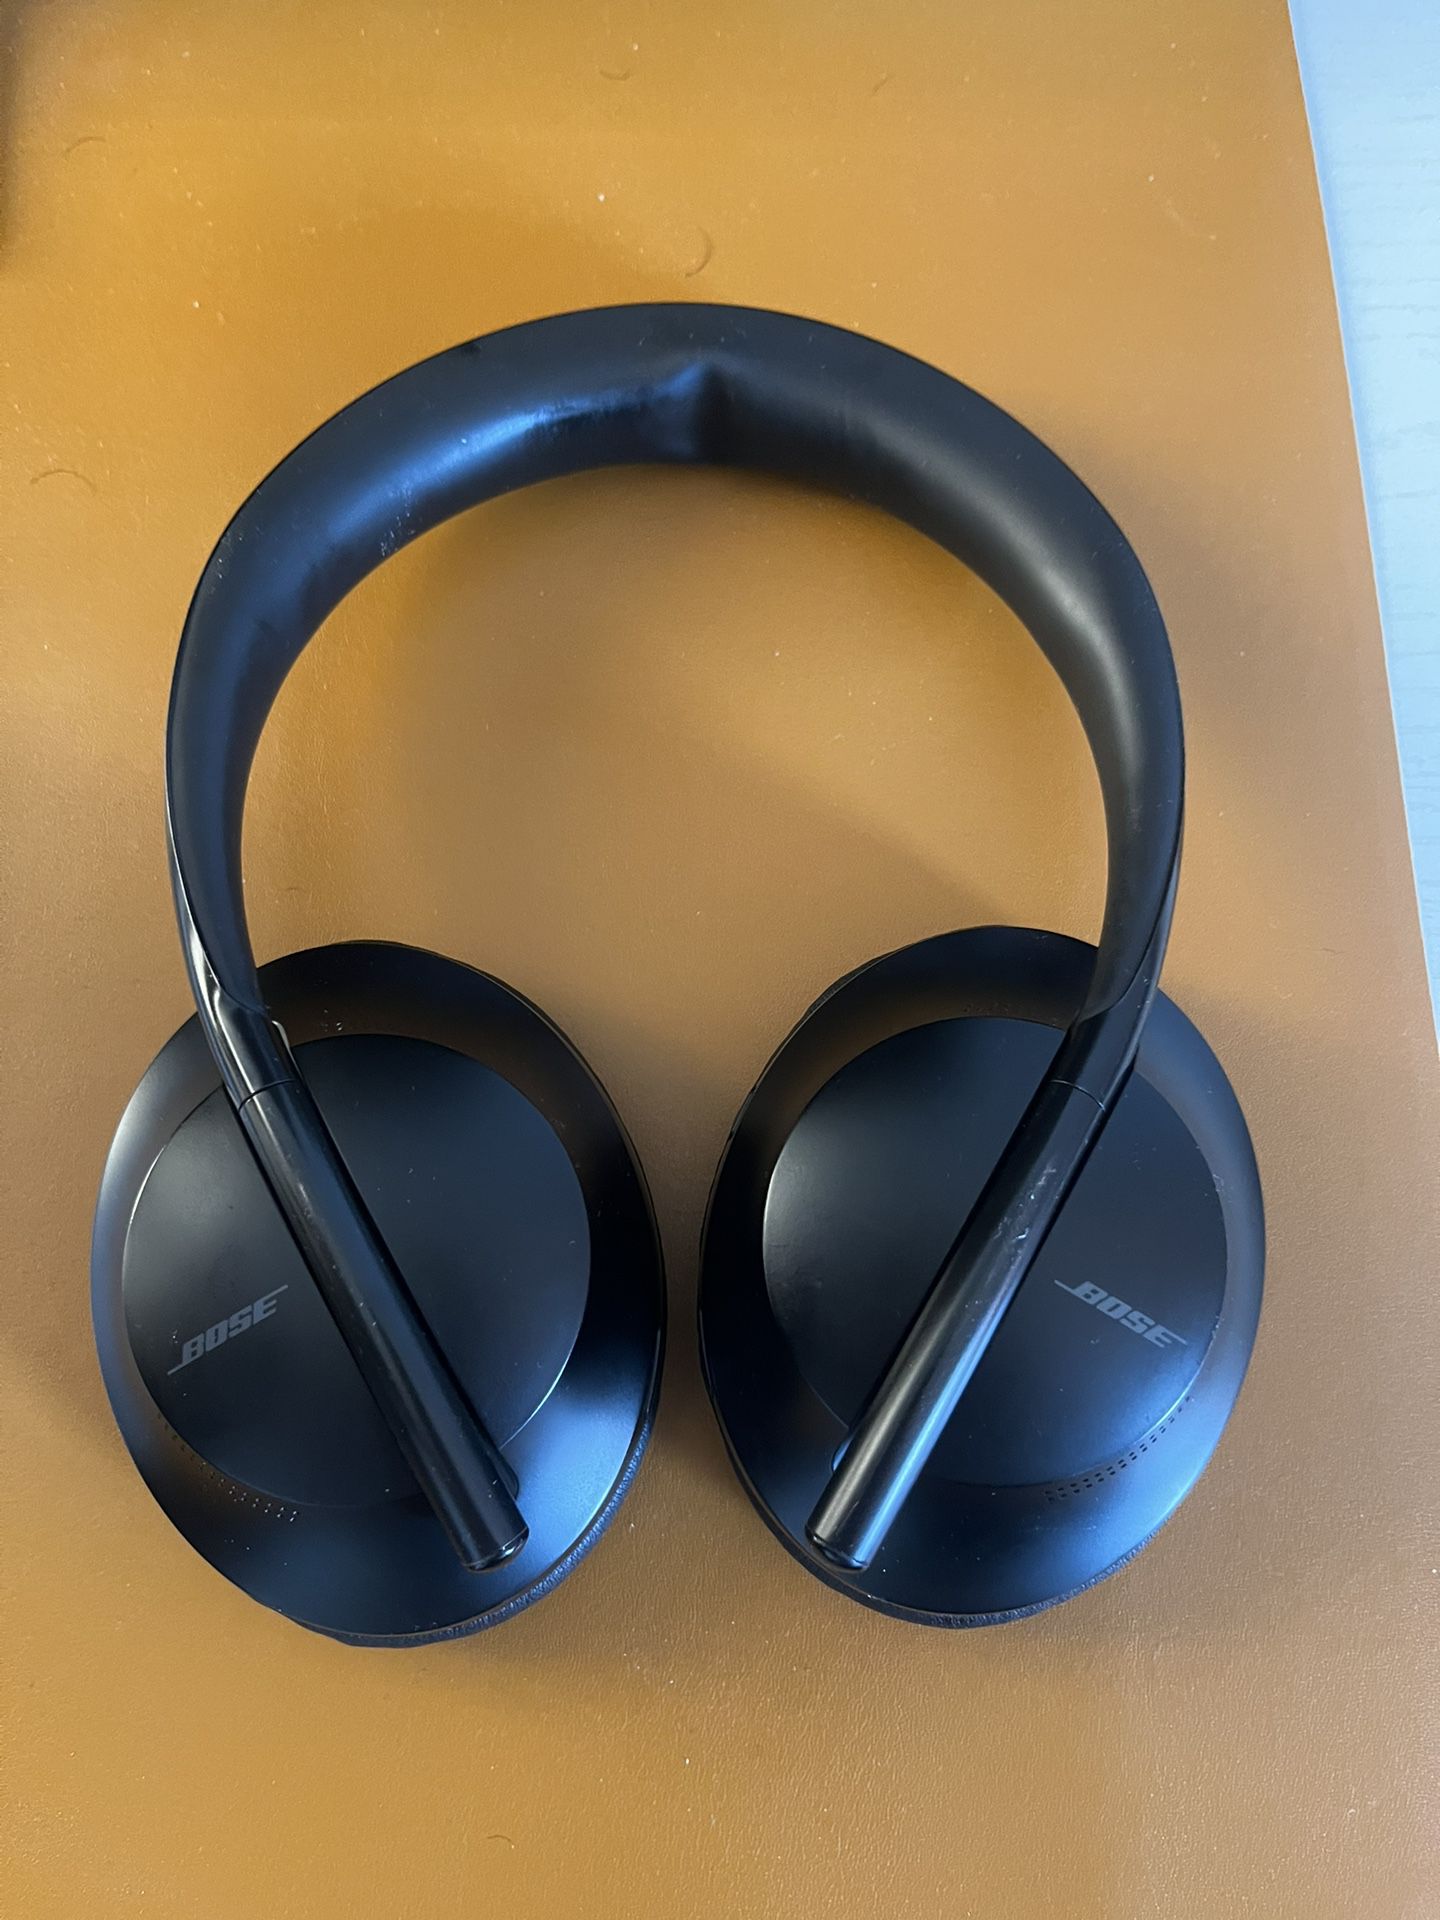 Bose Noise Cancelling Over-Ear Bluetooth Wireless Headphones 700